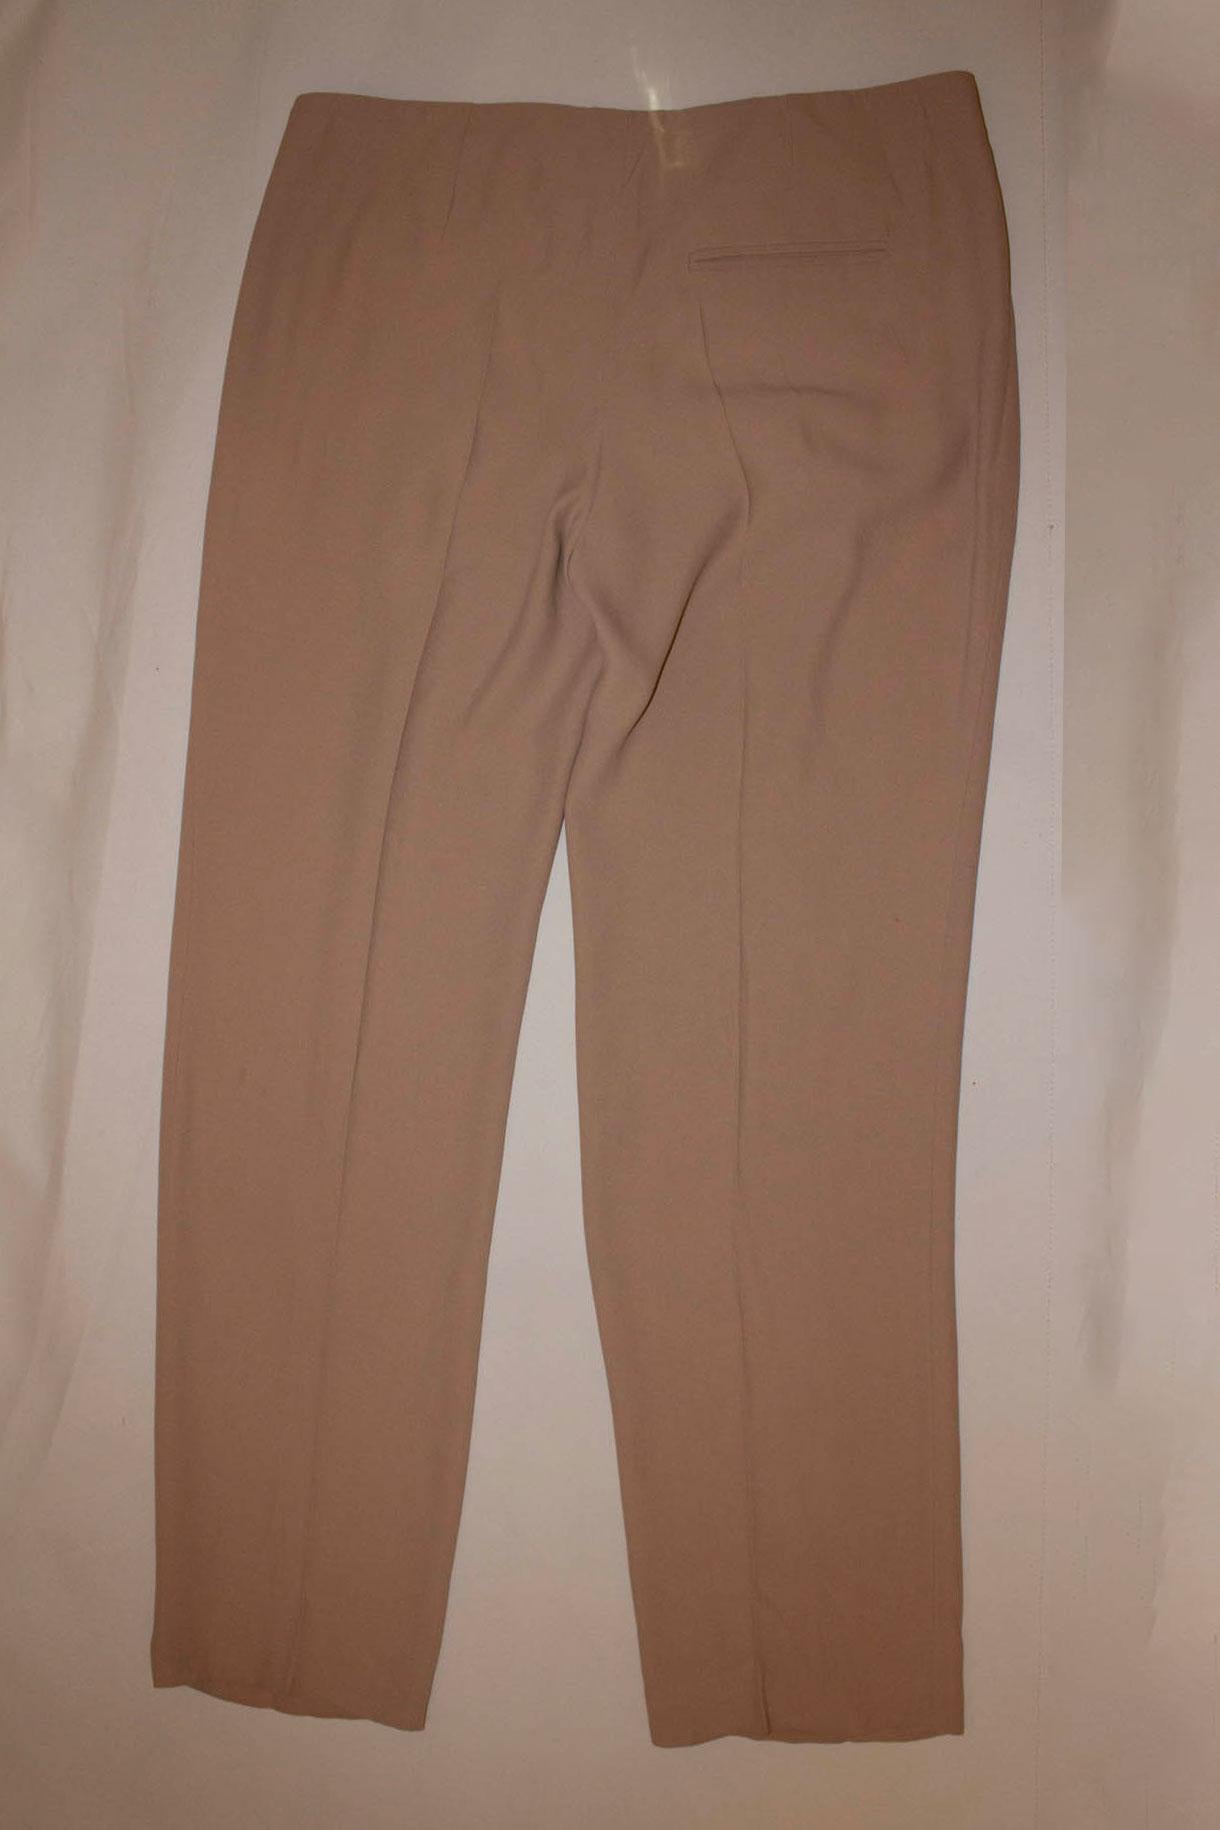 A chic pair of pants /trousers by Alexander Mc Queen mainline.  In a beautiful shade of beige the trousers have a side zip opening, and three button detail on the front. Size 44 
Measurements: Waist 33'' , inside leg 31'', hem 1 3/4''